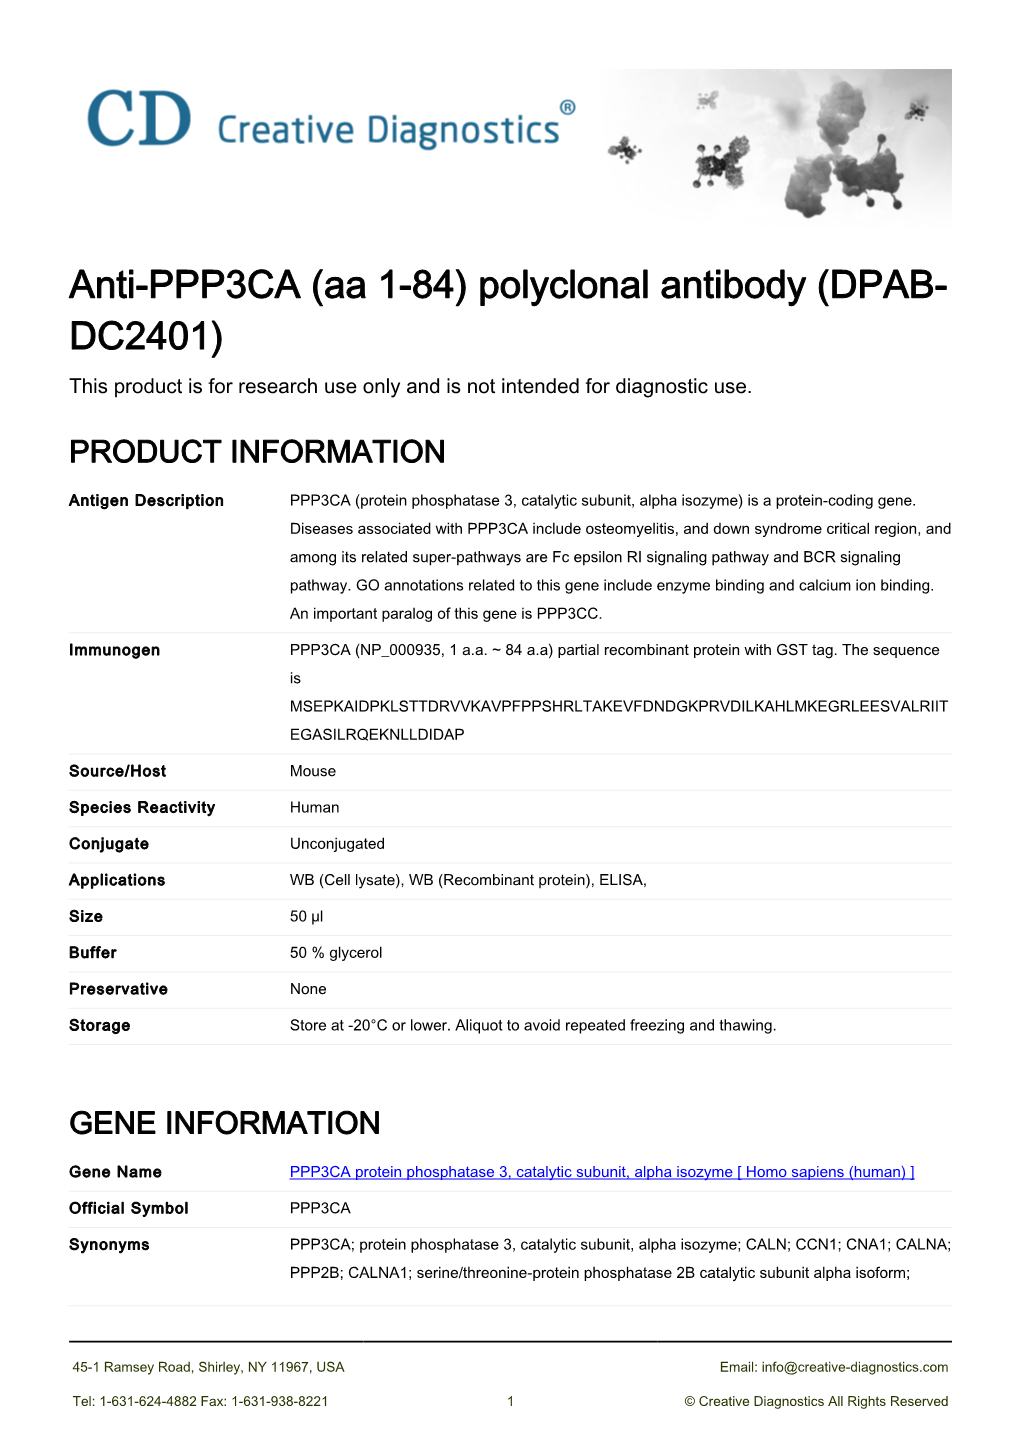 Anti-PPP3CA (Aa 1-84) Polyclonal Antibody (DPAB- DC2401) This Product Is for Research Use Only and Is Not Intended for Diagnostic Use